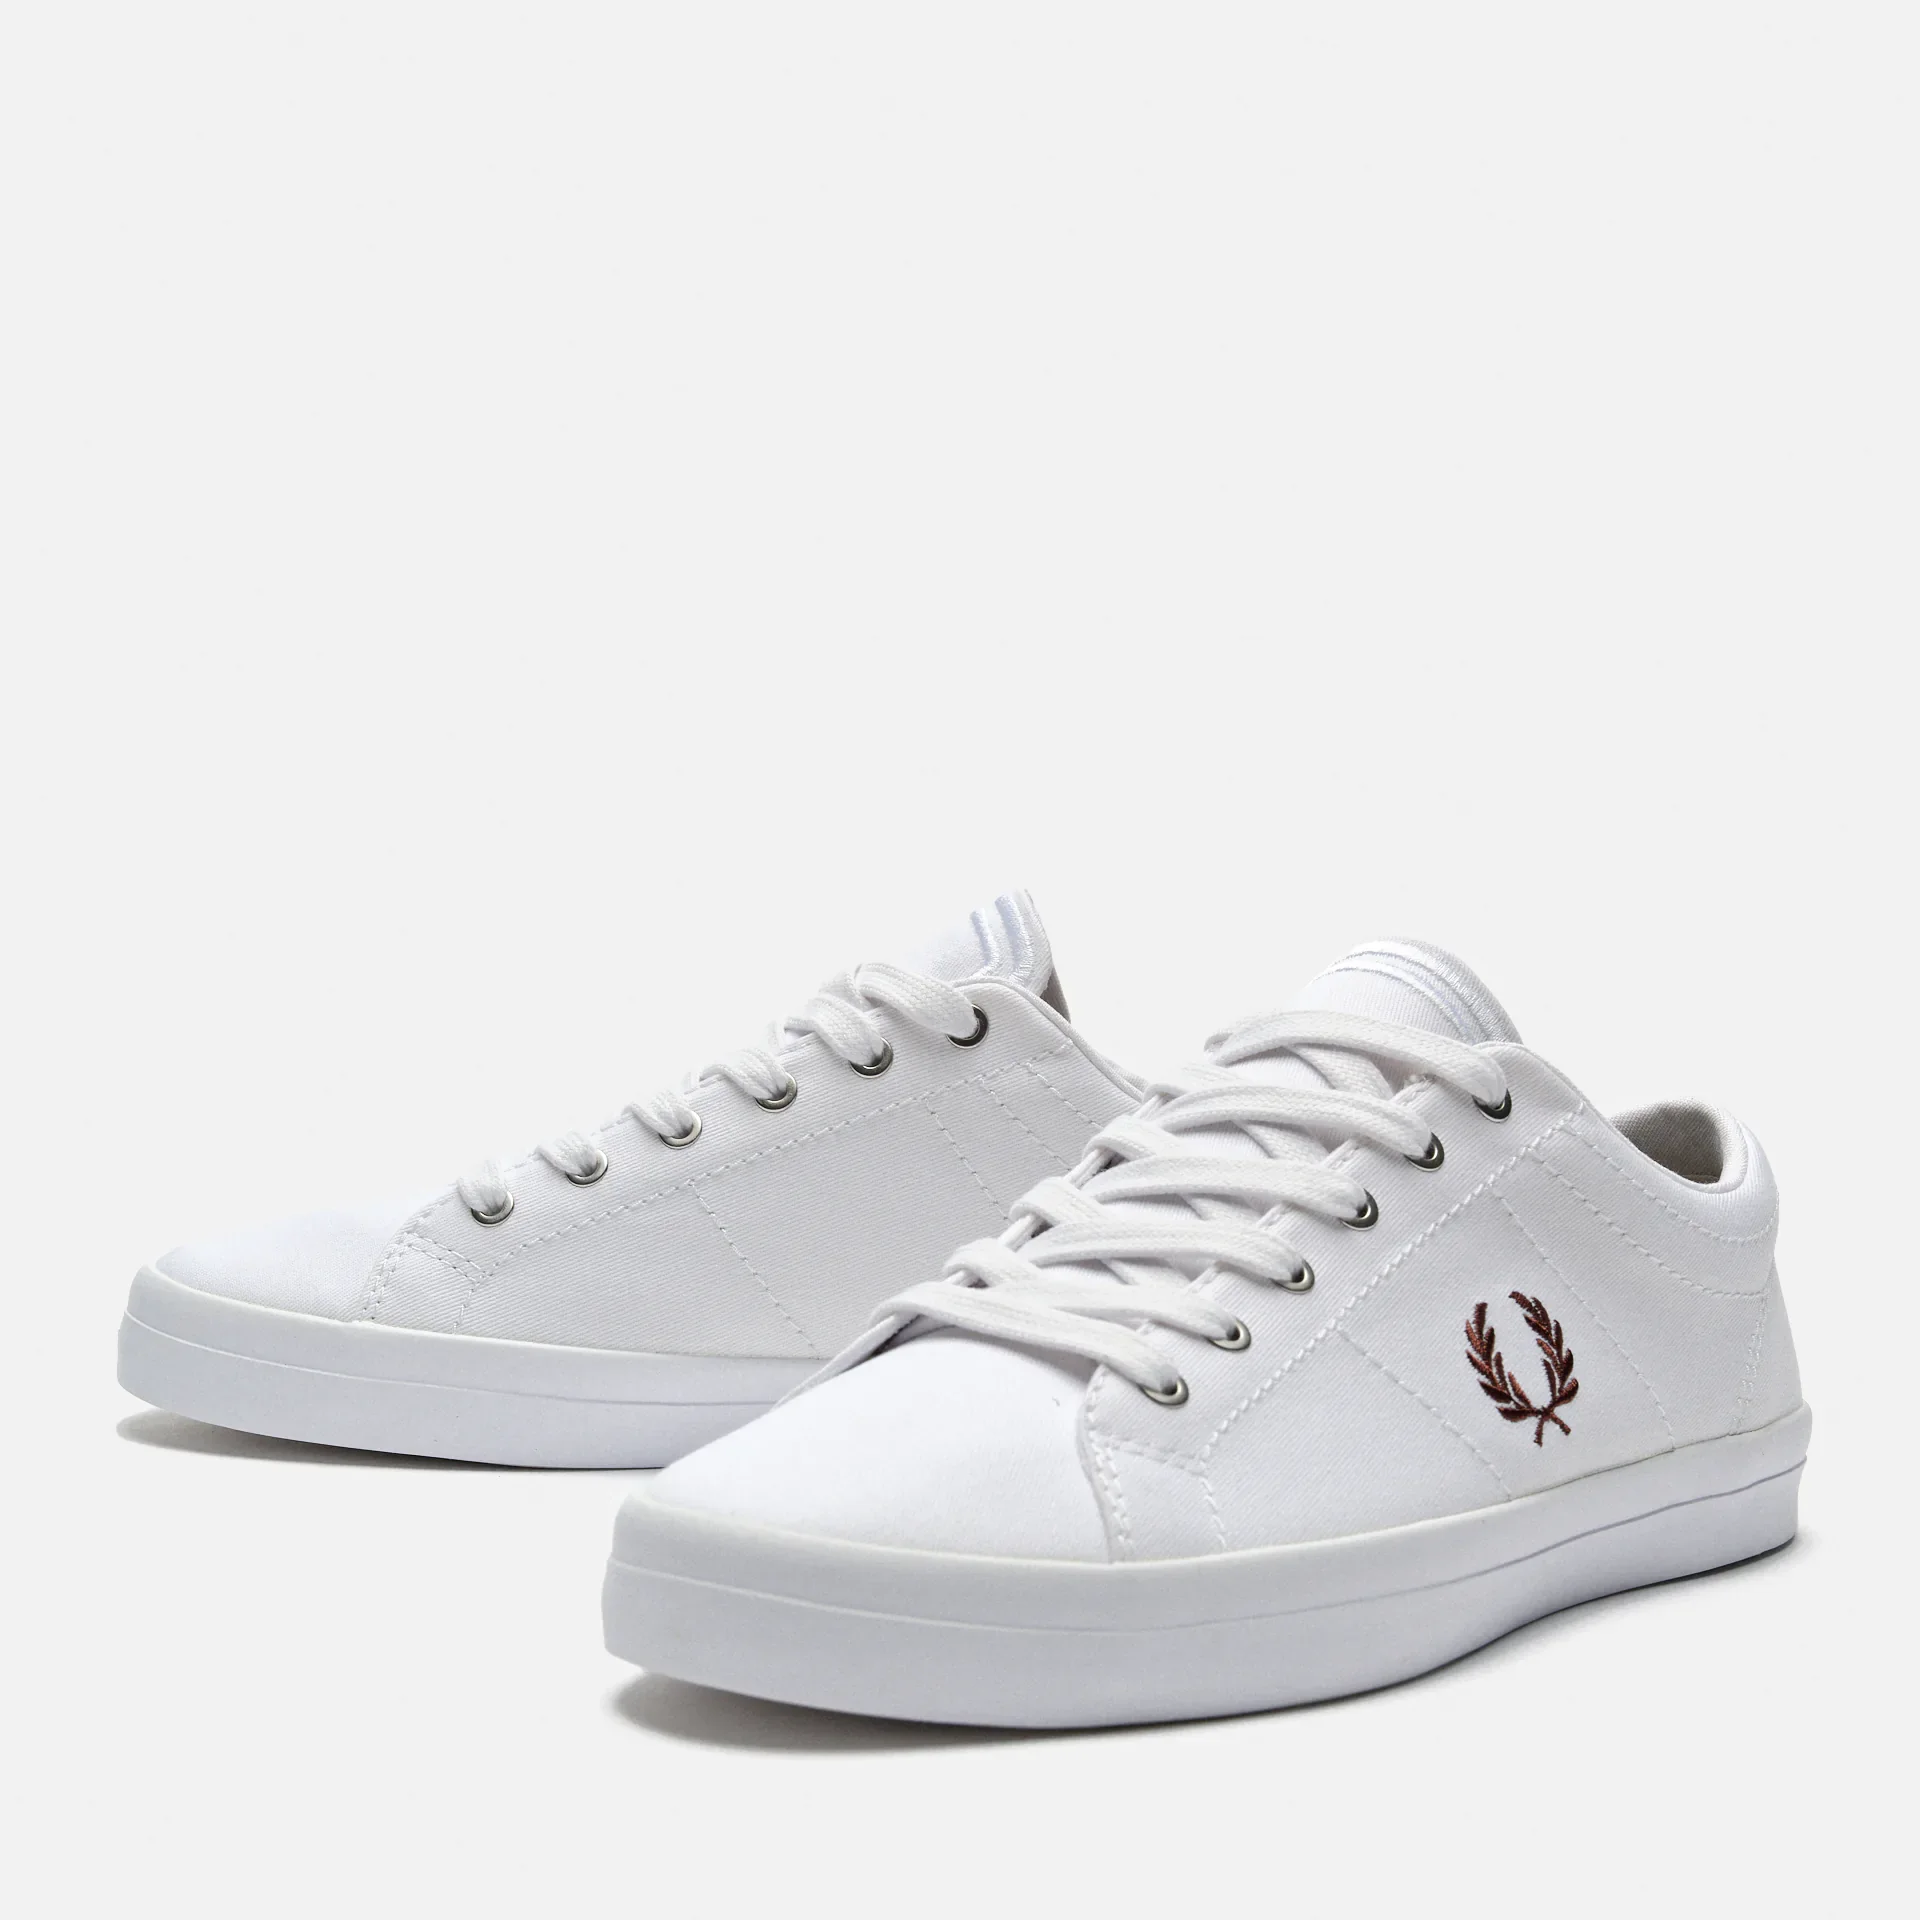 Fred Perry Baseline Twill Sneakers White/Carrington Brick